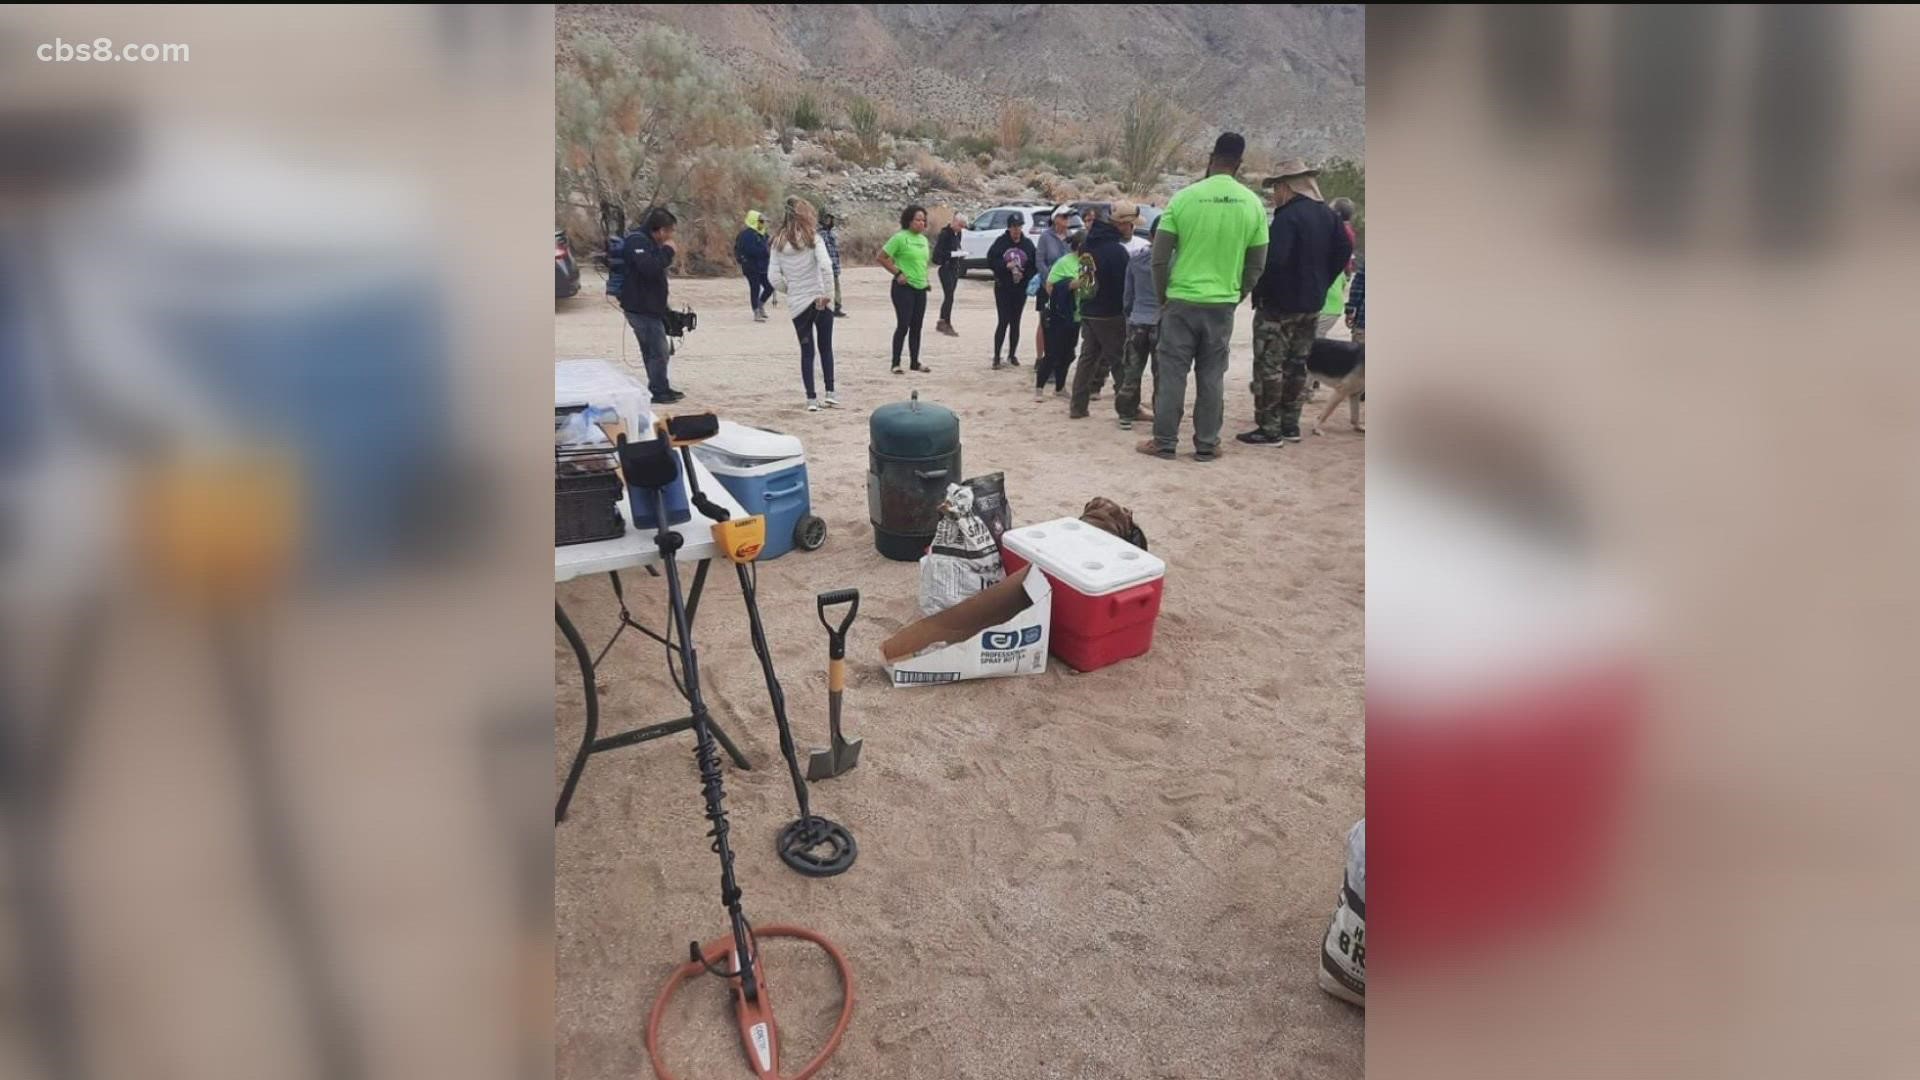 San Diegans showed up for Maya's family and friends and met in El Cajon Walmart parking lot Saturday at 7 a.m., to caravan to Anza Borrego to help search for Maya.